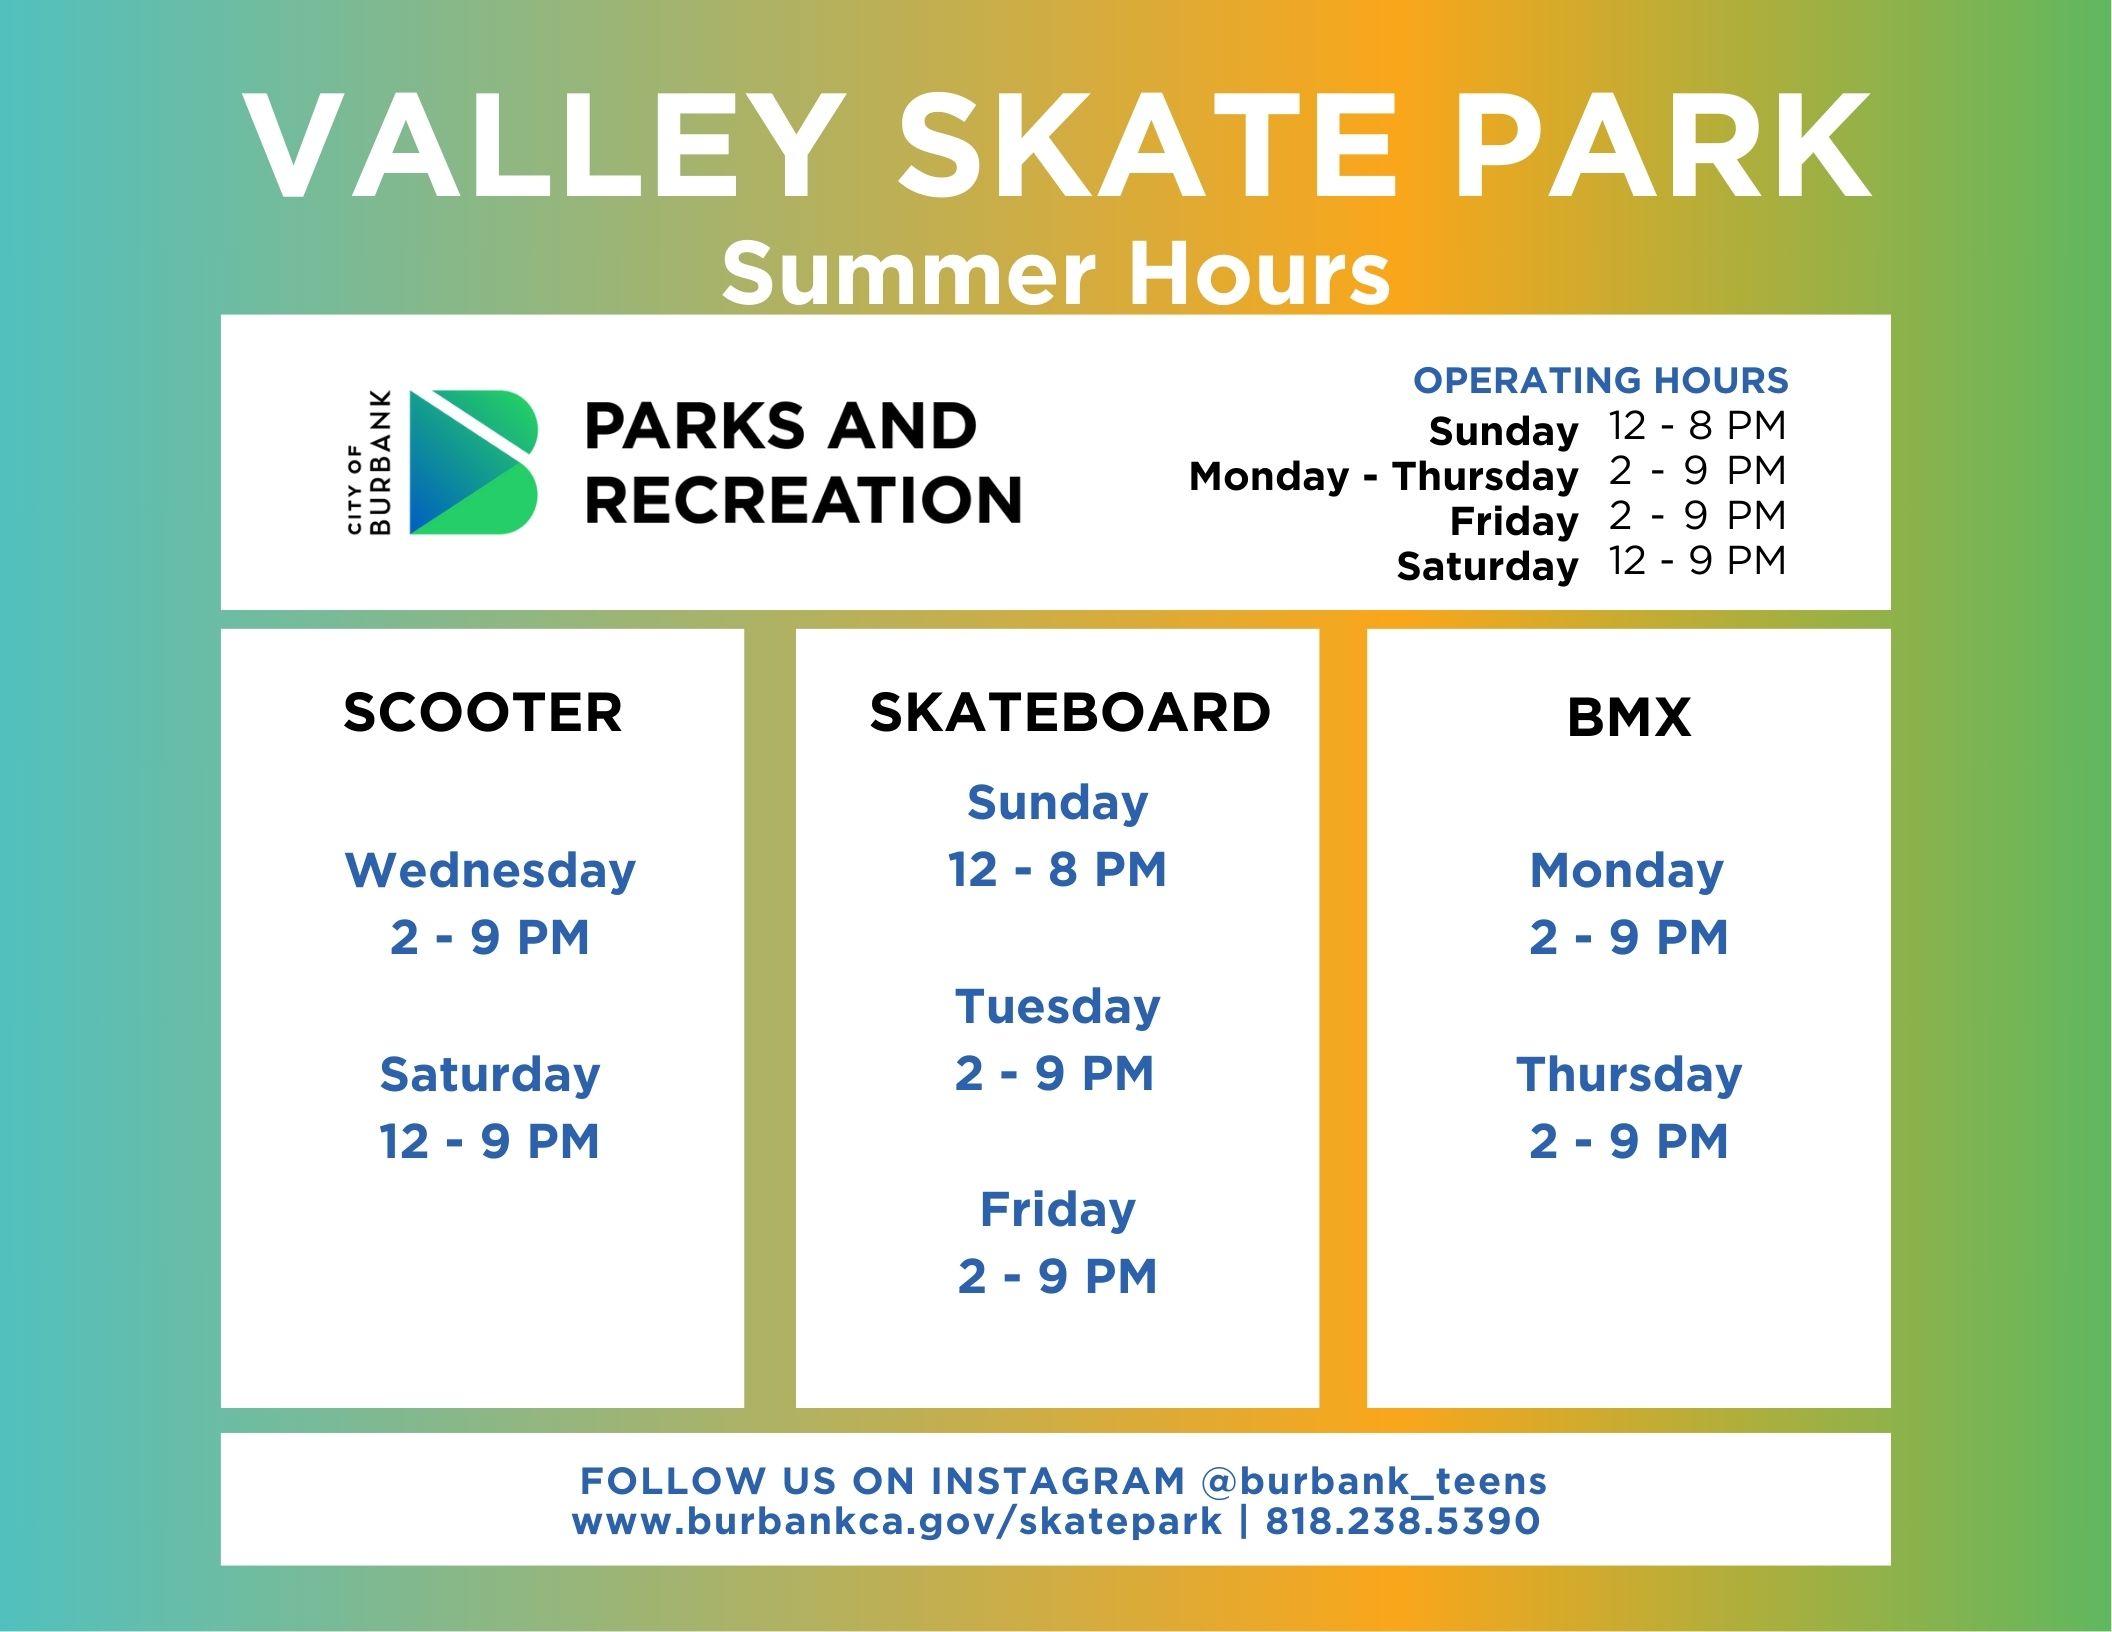 Valley Skate Park Summer Hours 2024 City of Burbank Parks and Recreation Operating Hours Sunday 12 - 8PM Monday - Thursday 2 - 9 PM Friday 2-9 PM Saturday 12 - 9PM Scooter Wednesday and Saturday Skateboard Sunday Tuesday Friday BMX Monday and Thursday Follow Us On Instagram @burbank_teens www.burbankca.gov/skatepark | 818 238 5390